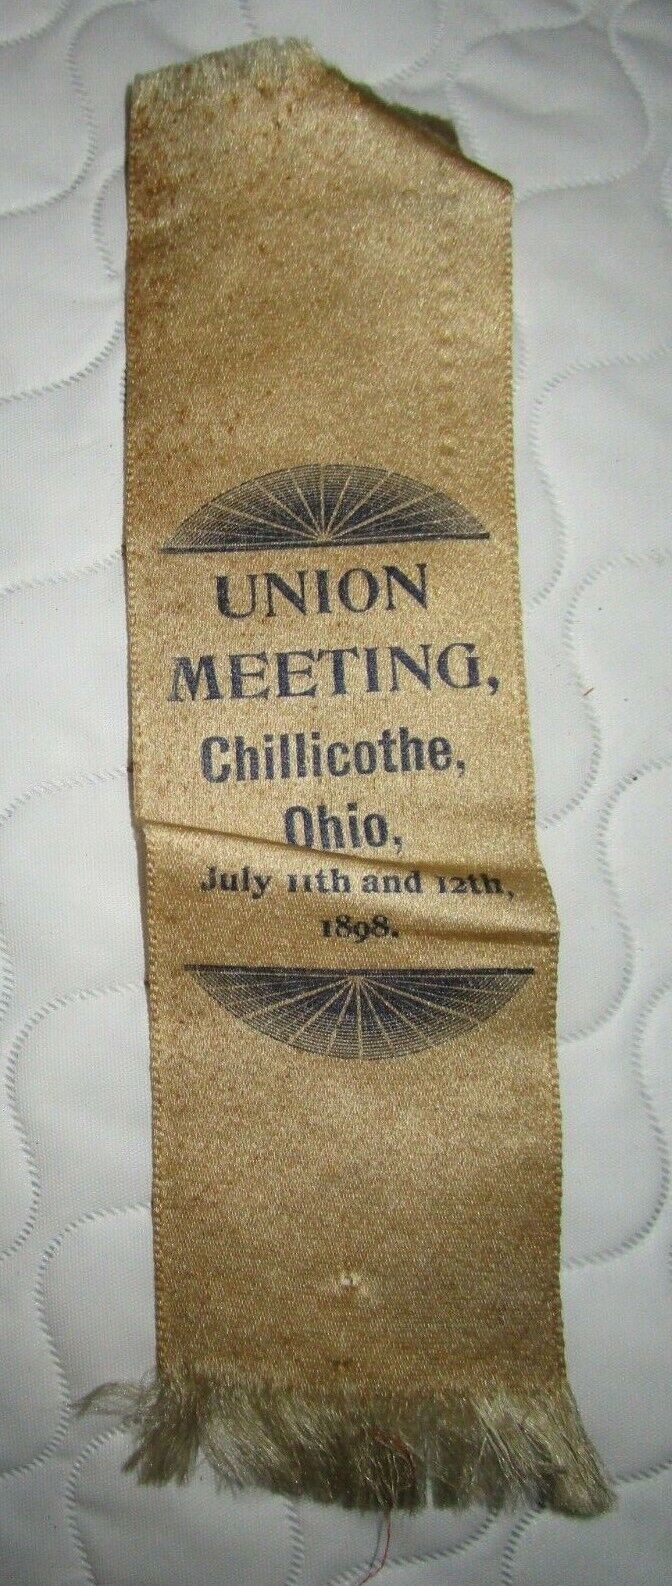 Union meeting July 11th & 12th 1898 Chillicothe Ohio Ribbon